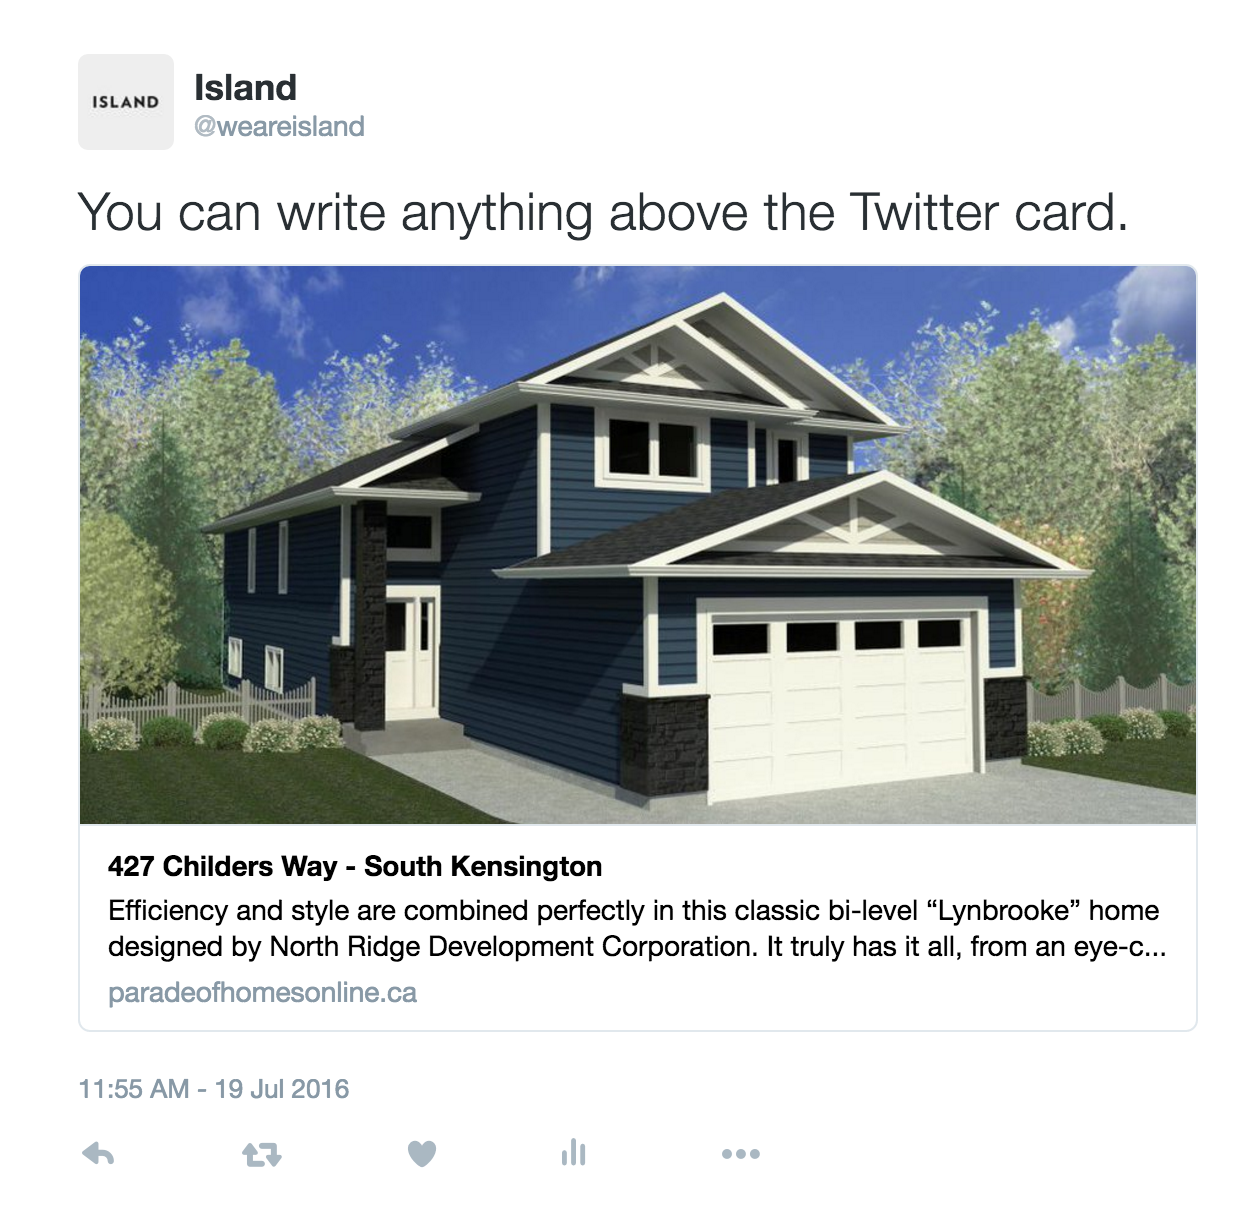 Example of a Twitter Card